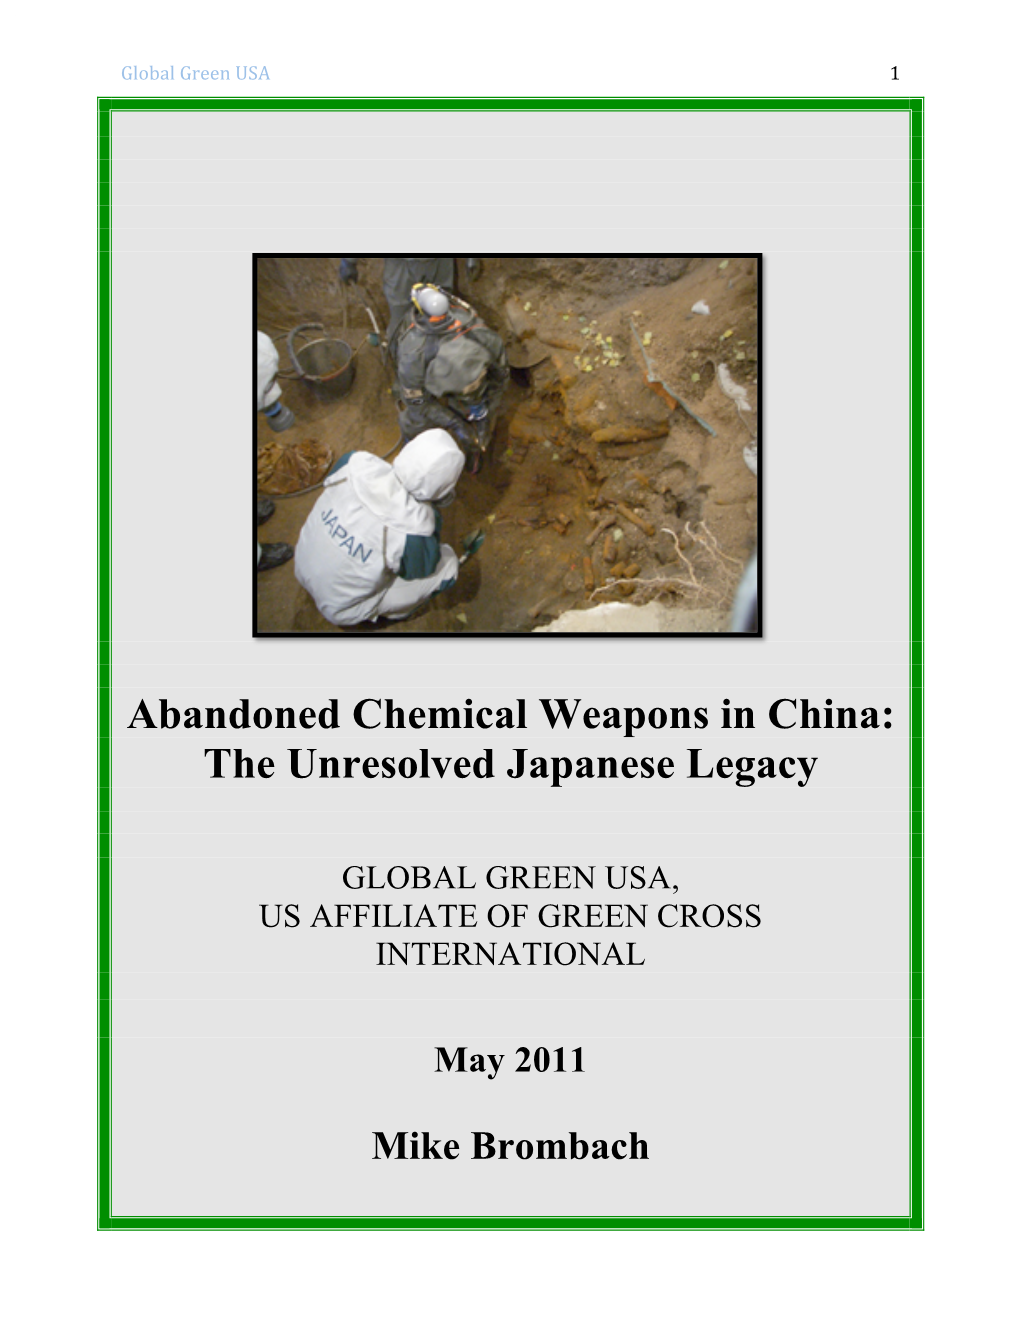 Abandoned Chemical Weapons in China: the Unresolved Japanese Legacy